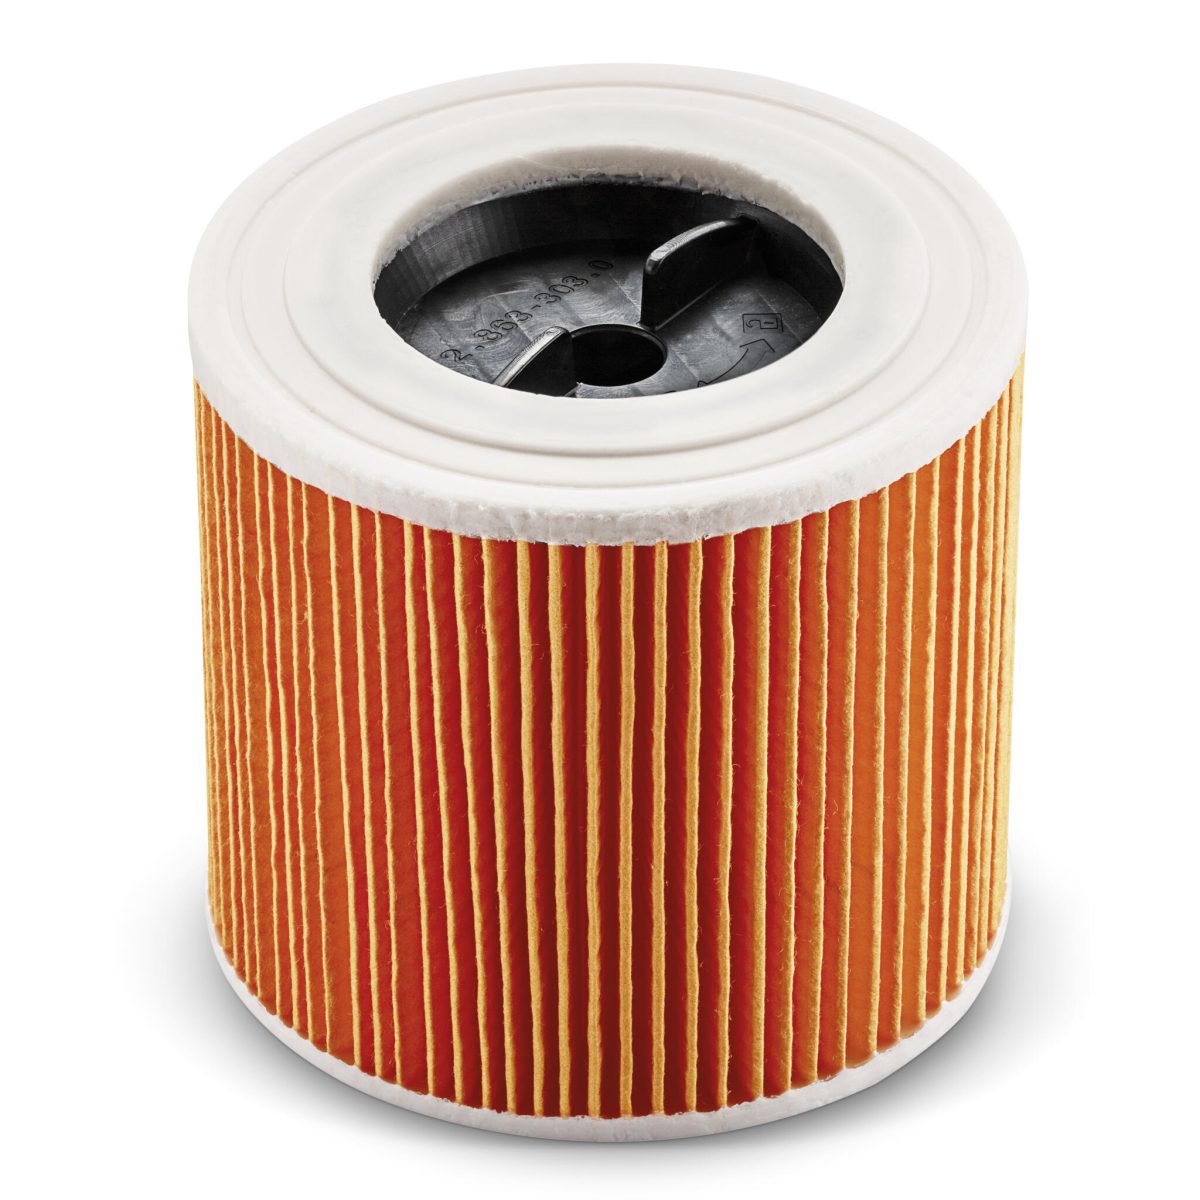 Cartridge Filter for WD Vacuums